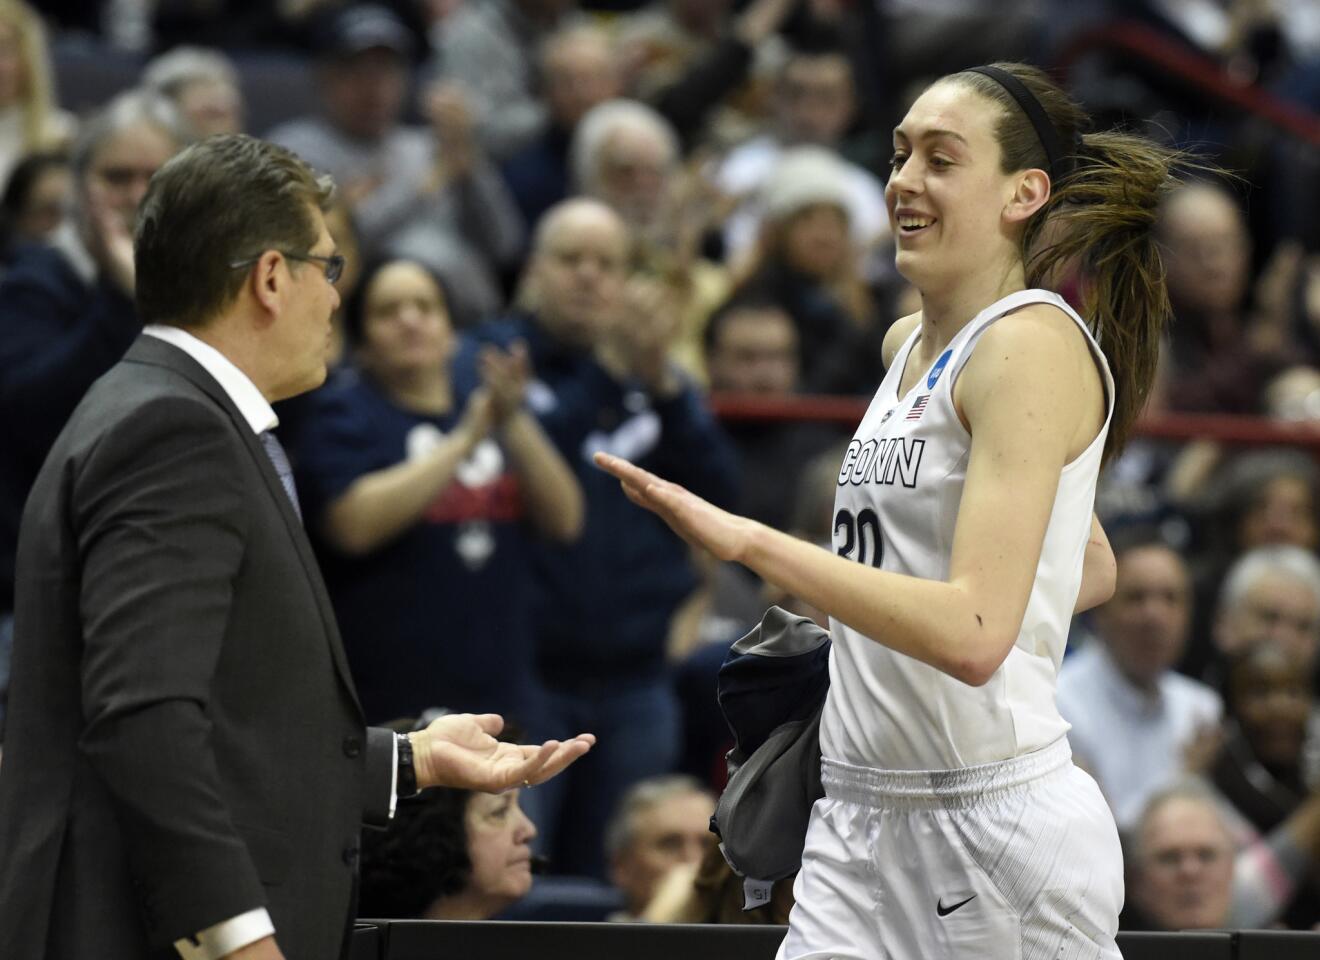 Breanna Stewart is finished for the day, scoring 31 points in the 105-54 win over Texas.